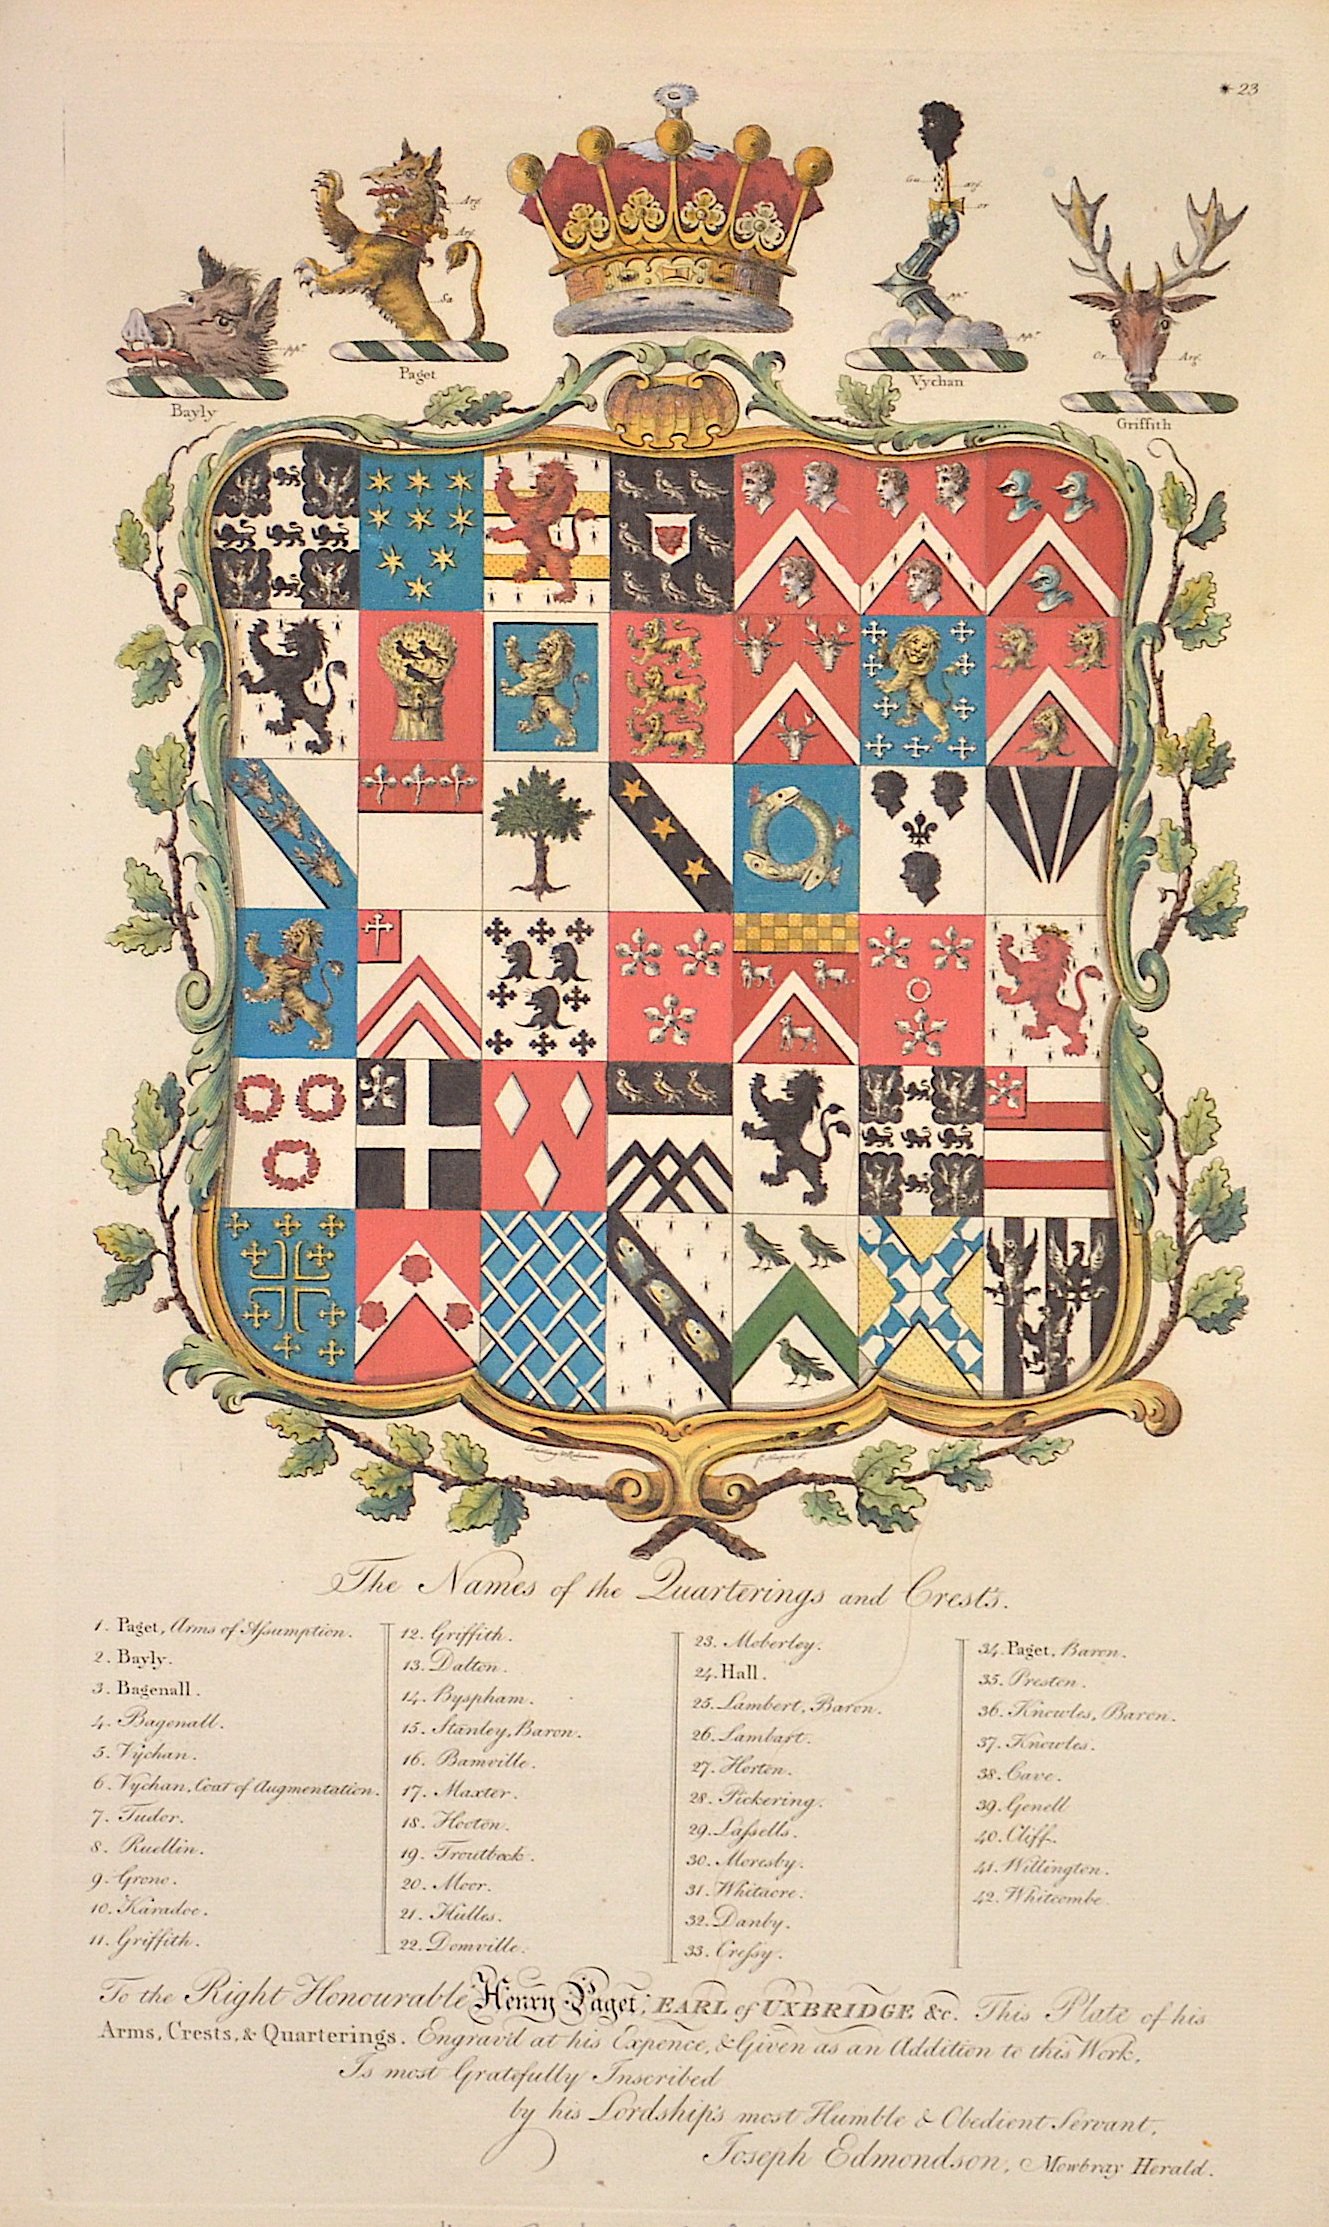 Edmondson  The Names of the Quarterings and Crest’s. / To the Right Honourable Henry Paget, Earl of Uxbridge u. c.